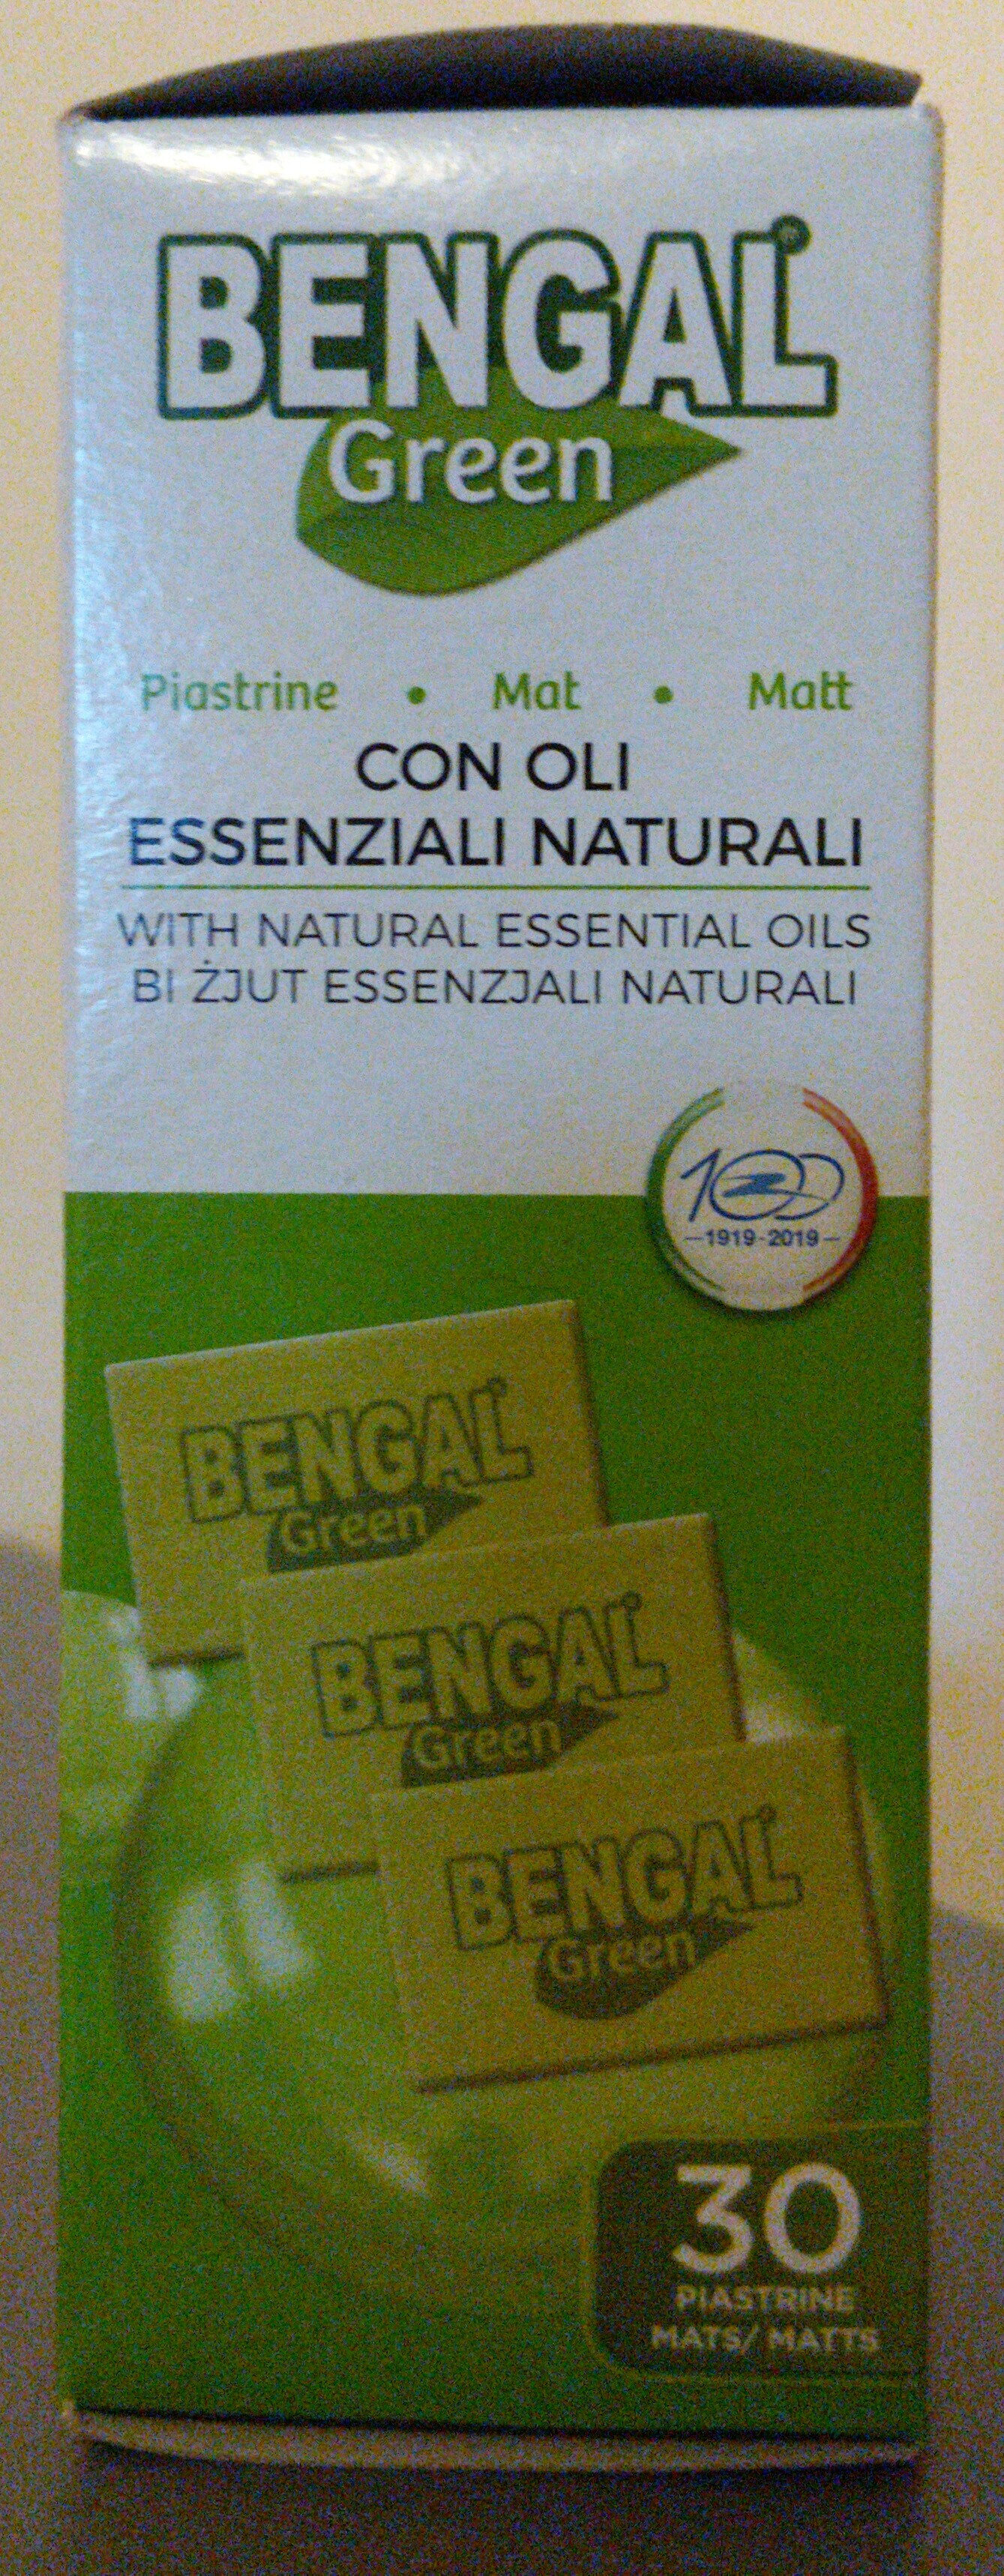 Bengal Green - Product - it